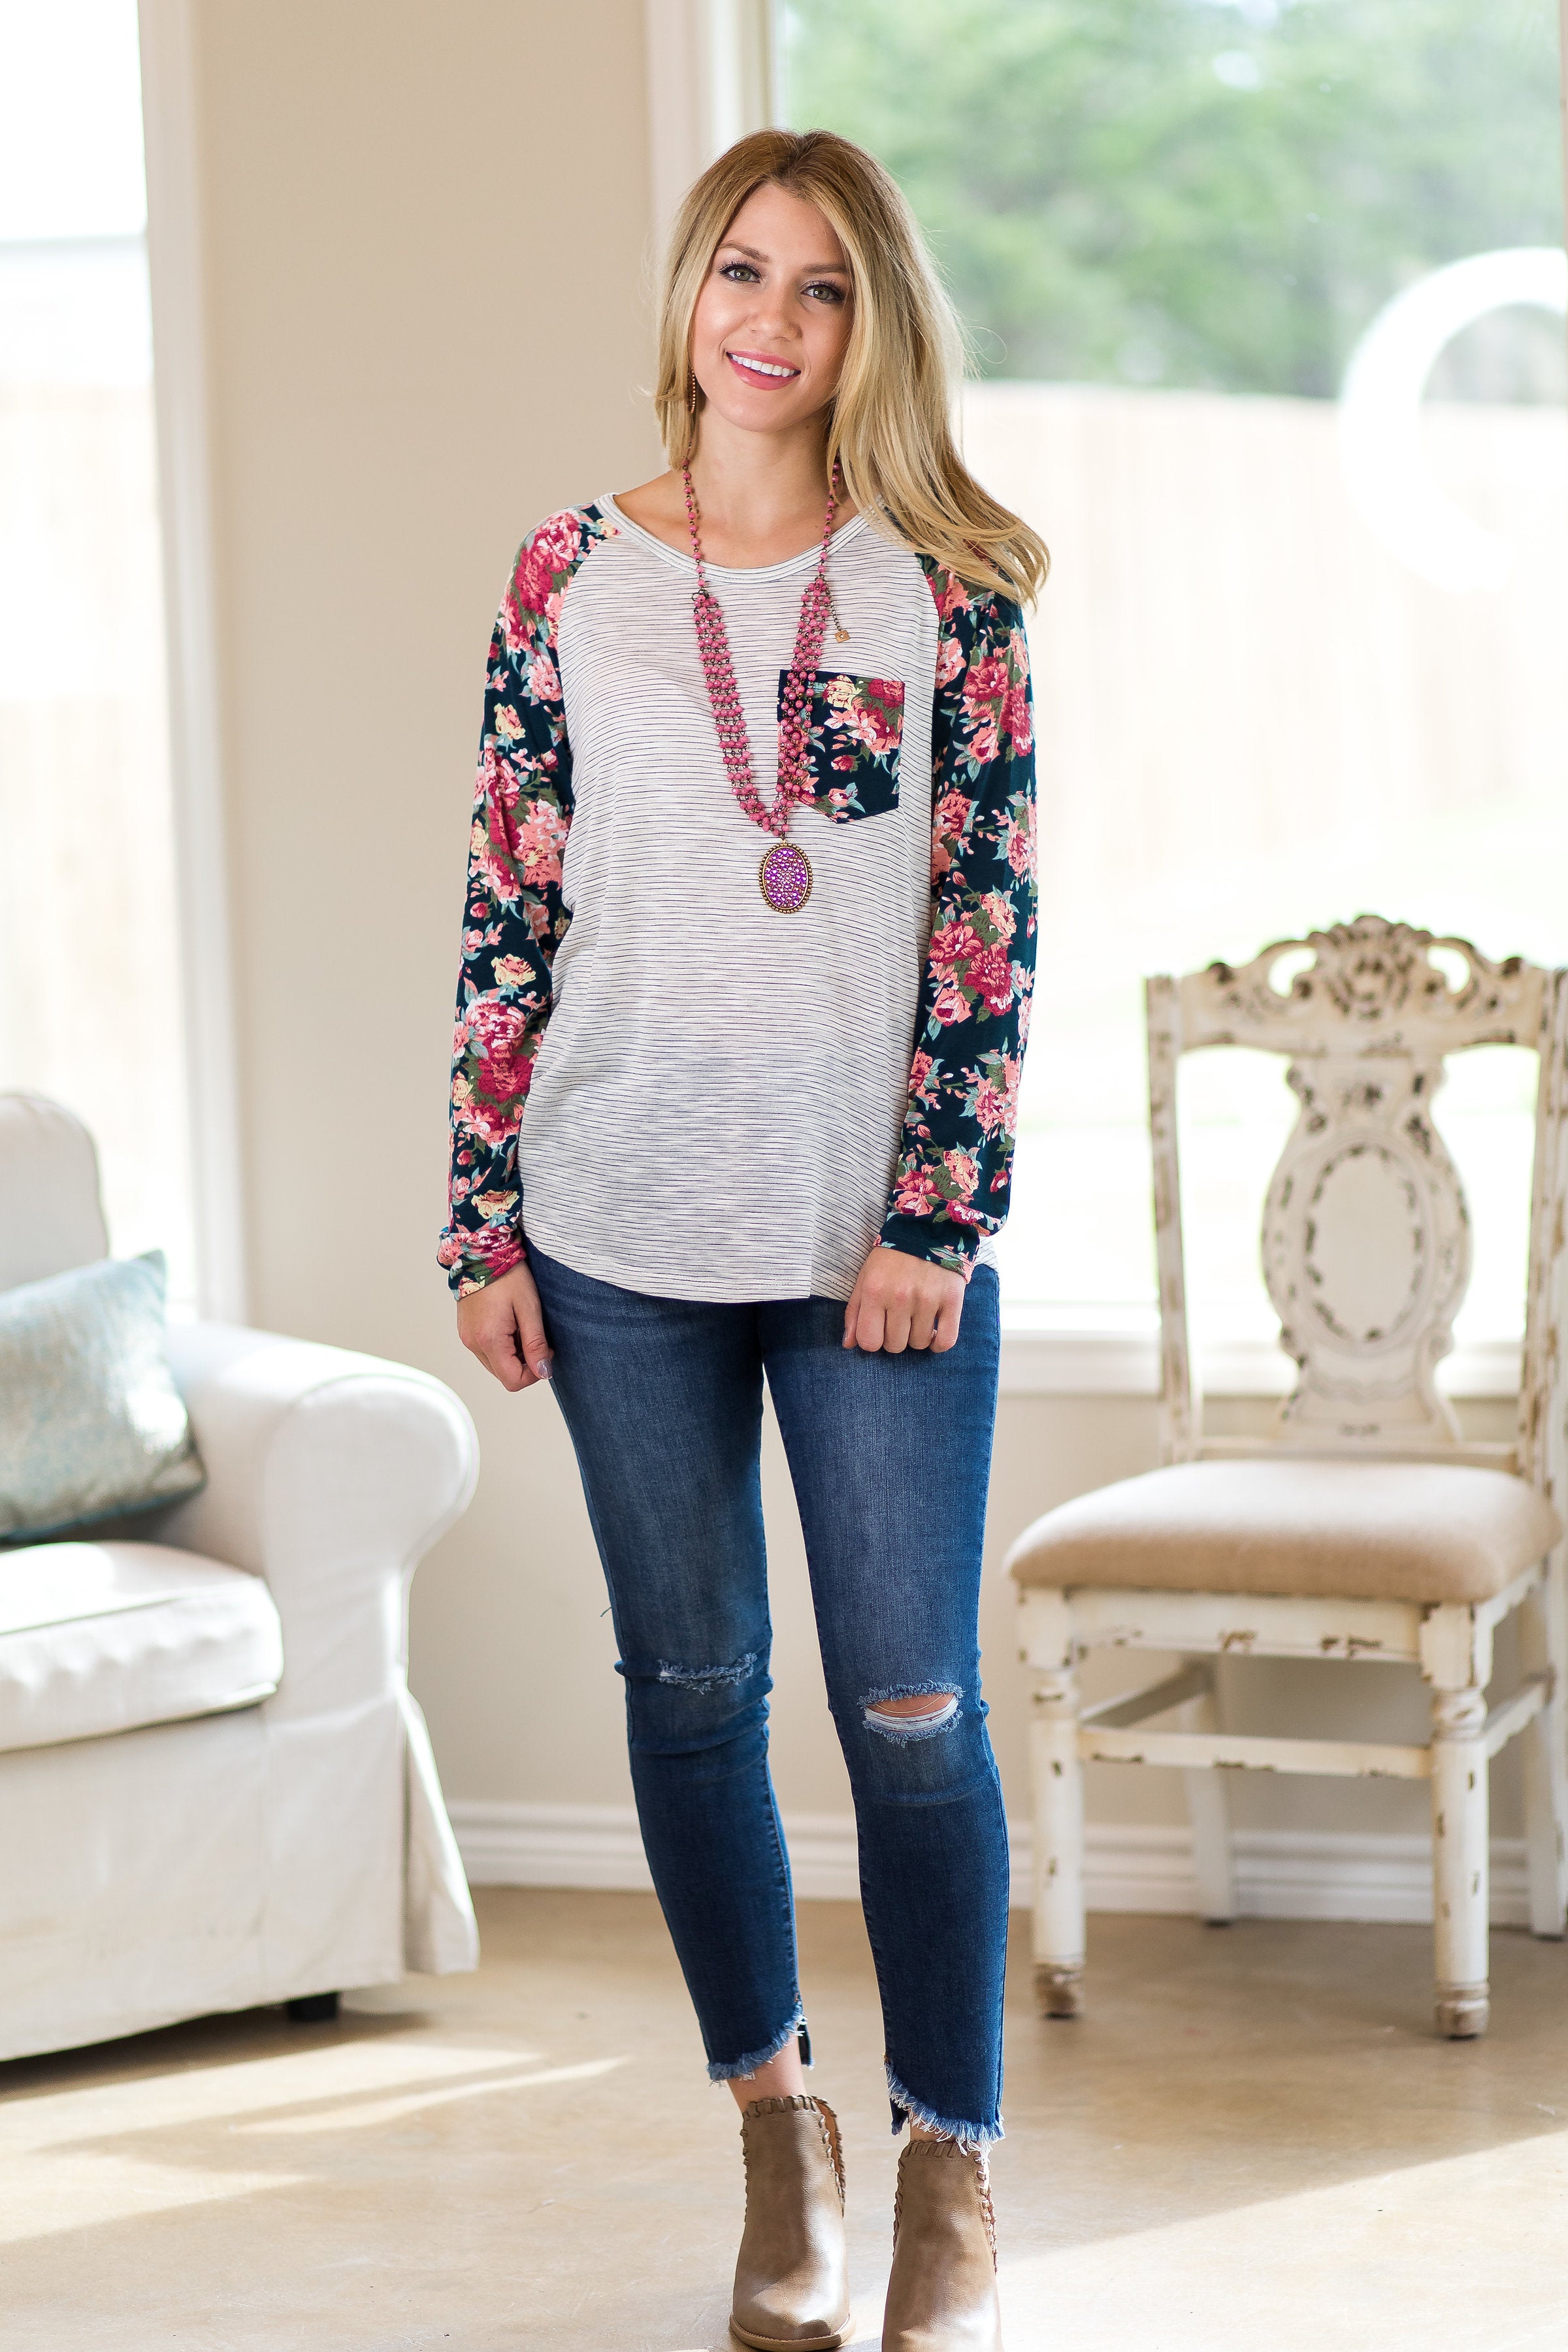 Win Them Over Stripe Pocket Blouse with Floral Long Sleeves - Giddy Up Glamour Boutique